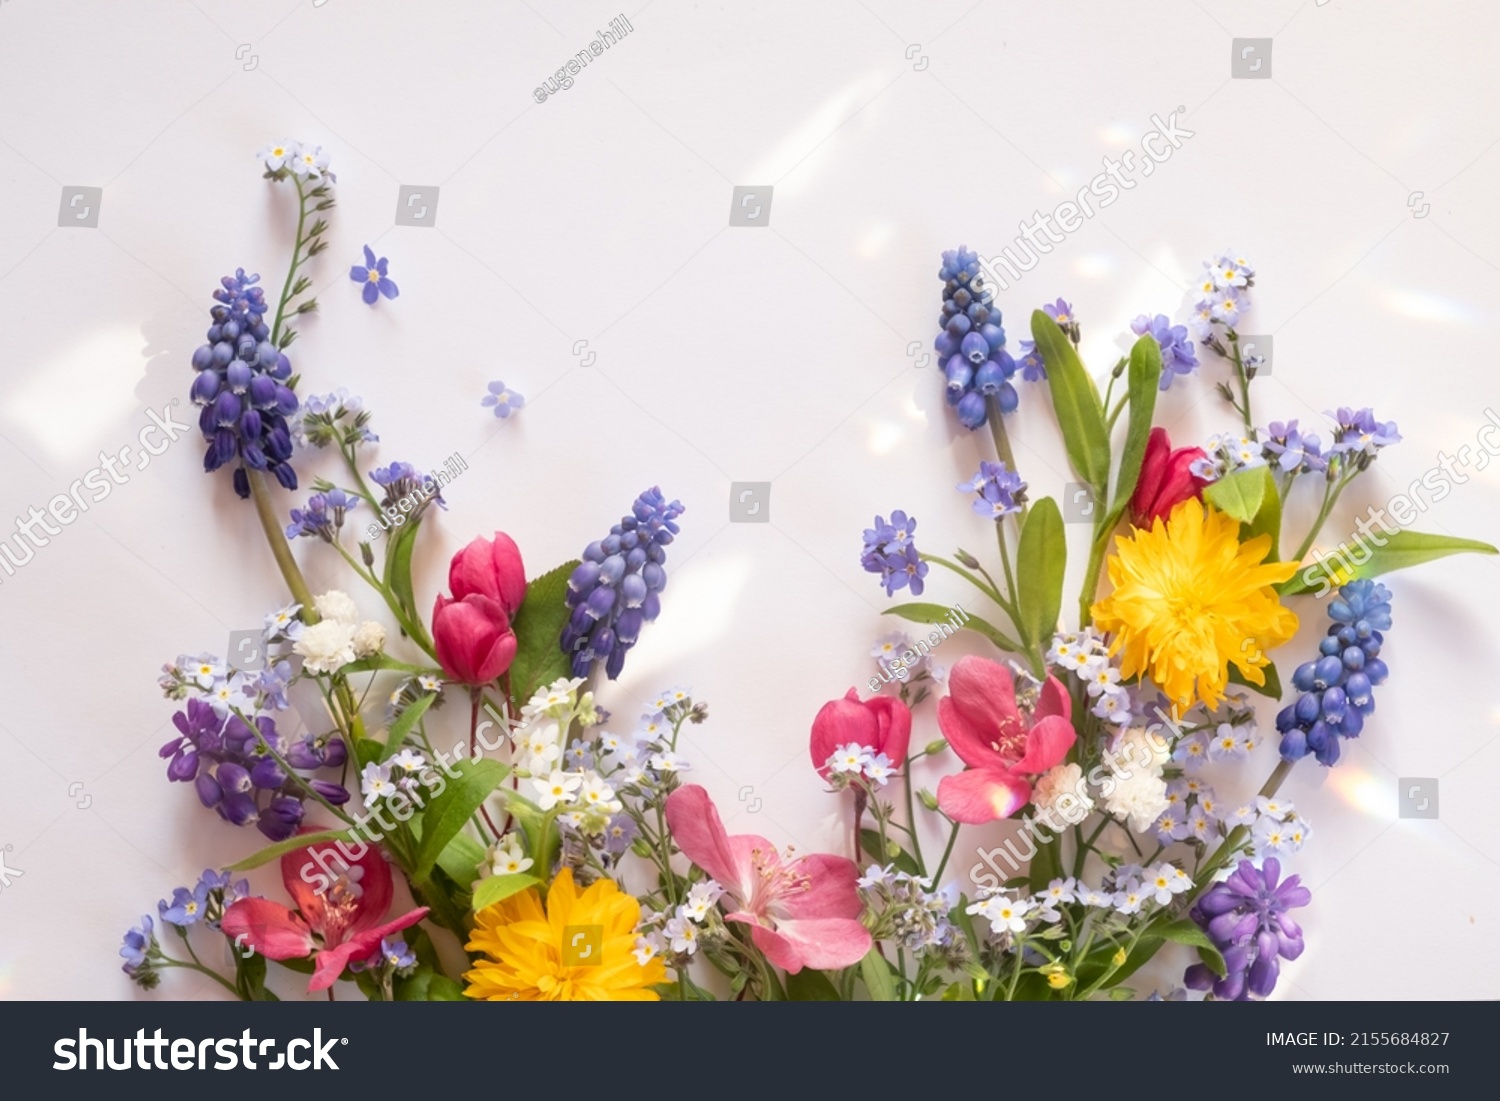 floral layout from different wildflowers on a white background. Beautiful light reflections. Top view. wildflowers flat lay  #2155684827